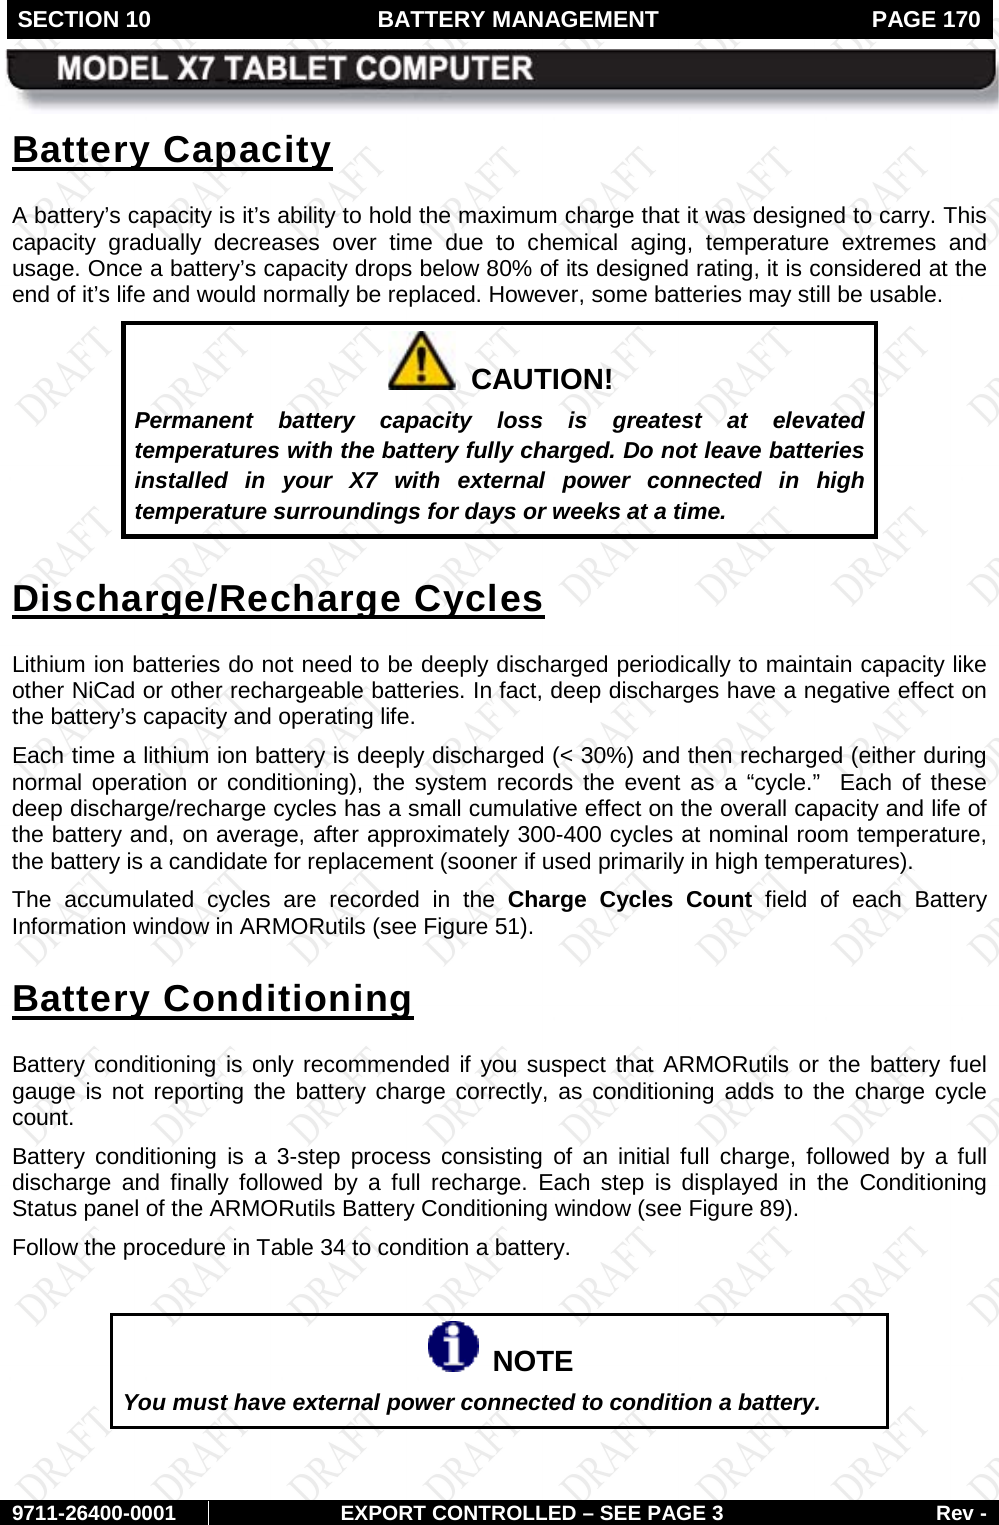 SECTION 10 BATTERY MANAGEMENT  PAGE 170        9711-26400-0001 EXPORT CONTROLLED – SEE PAGE 3 Rev - Battery Capacity A battery’s capacity is it’s ability to hold the maximum charge that it was designed to carry. This capacity gradually decreases over time due to chemical aging, temperature extremes and usage. Once a battery’s capacity drops below 80% of its designed rating, it is considered at the end of it’s life and would normally be replaced. However, some batteries may still be usable.    CAUTION! Permanent battery capacity loss is greatest at elevated temperatures with the battery fully charged. Do not leave batteries installed in your X7 with external power connected in high temperature surroundings for days or weeks at a time. Discharge/Recharge Cycles Lithium ion batteries do not need to be deeply discharged periodically to maintain capacity like other NiCad or other rechargeable batteries. In fact, deep discharges have a negative effect on the battery’s capacity and operating life.  Each time a lithium ion battery is deeply discharged (&lt; 30%) and then recharged (either during normal operation or conditioning), the system records the event as a “cycle.”  Each of these deep discharge/recharge cycles has a small cumulative effect on the overall capacity and life of the battery and, on average, after approximately 300-400 cycles at nominal room temperature, the battery is a candidate for replacement (sooner if used primarily in high temperatures).  The accumulated cycles are recorded in the Charge Cycles Count field of each Battery Information window in ARMORutils (see Figure 51). Battery Conditioning Battery conditioning is only recommended if you suspect that ARMORutils or the battery fuel gauge is not reporting the battery charge correctly, as conditioning adds to the charge cycle count. Battery conditioning is a 3-step process consisting of an initial full charge, followed by a full discharge and finally followed by a full recharge. Each step is displayed in the Conditioning Status panel of the ARMORutils Battery Conditioning window (see Figure 89).  Follow the procedure in Table 34 to condition a battery.    NOTE You must have external power connected to condition a battery.   